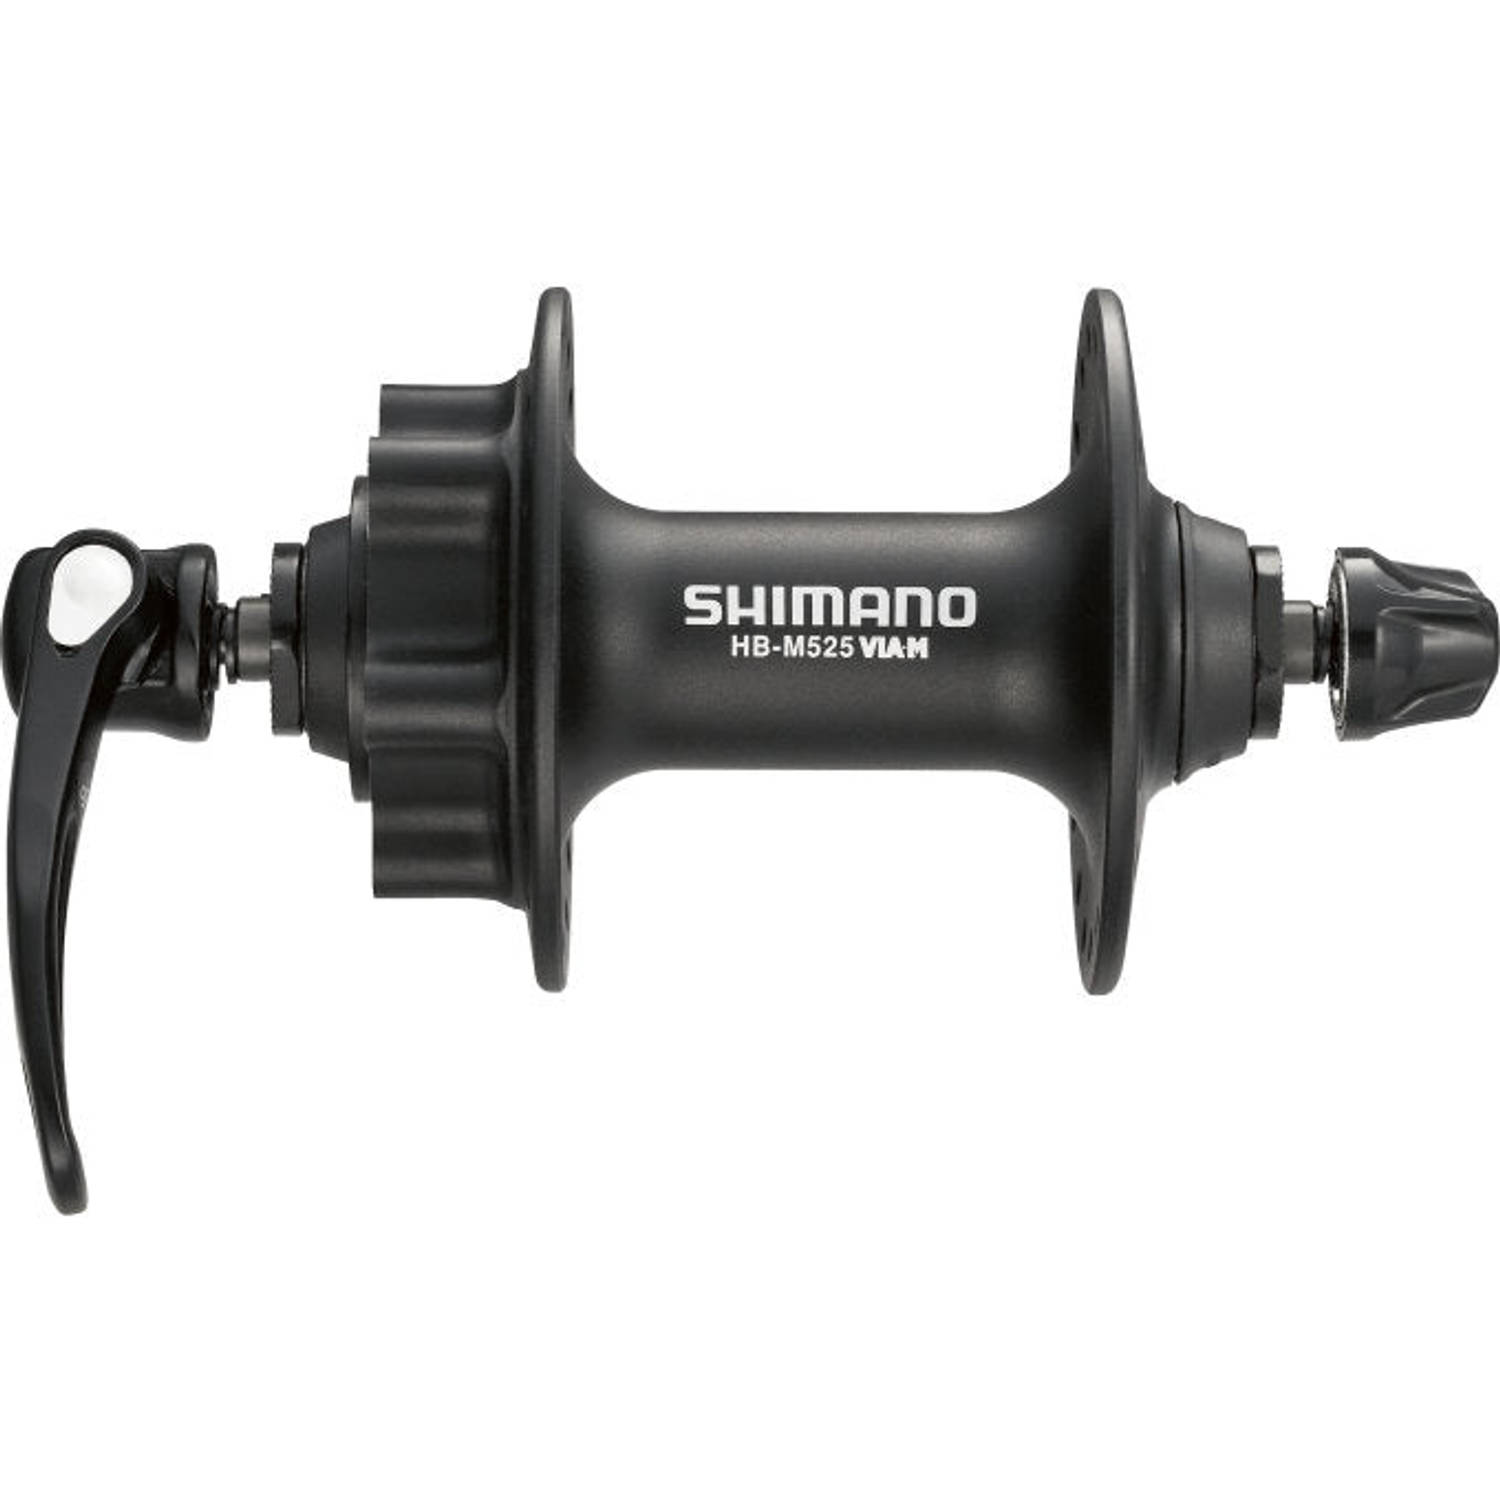 Shimano HB-M525 Deore Disc Front Hub 36 Hole Black